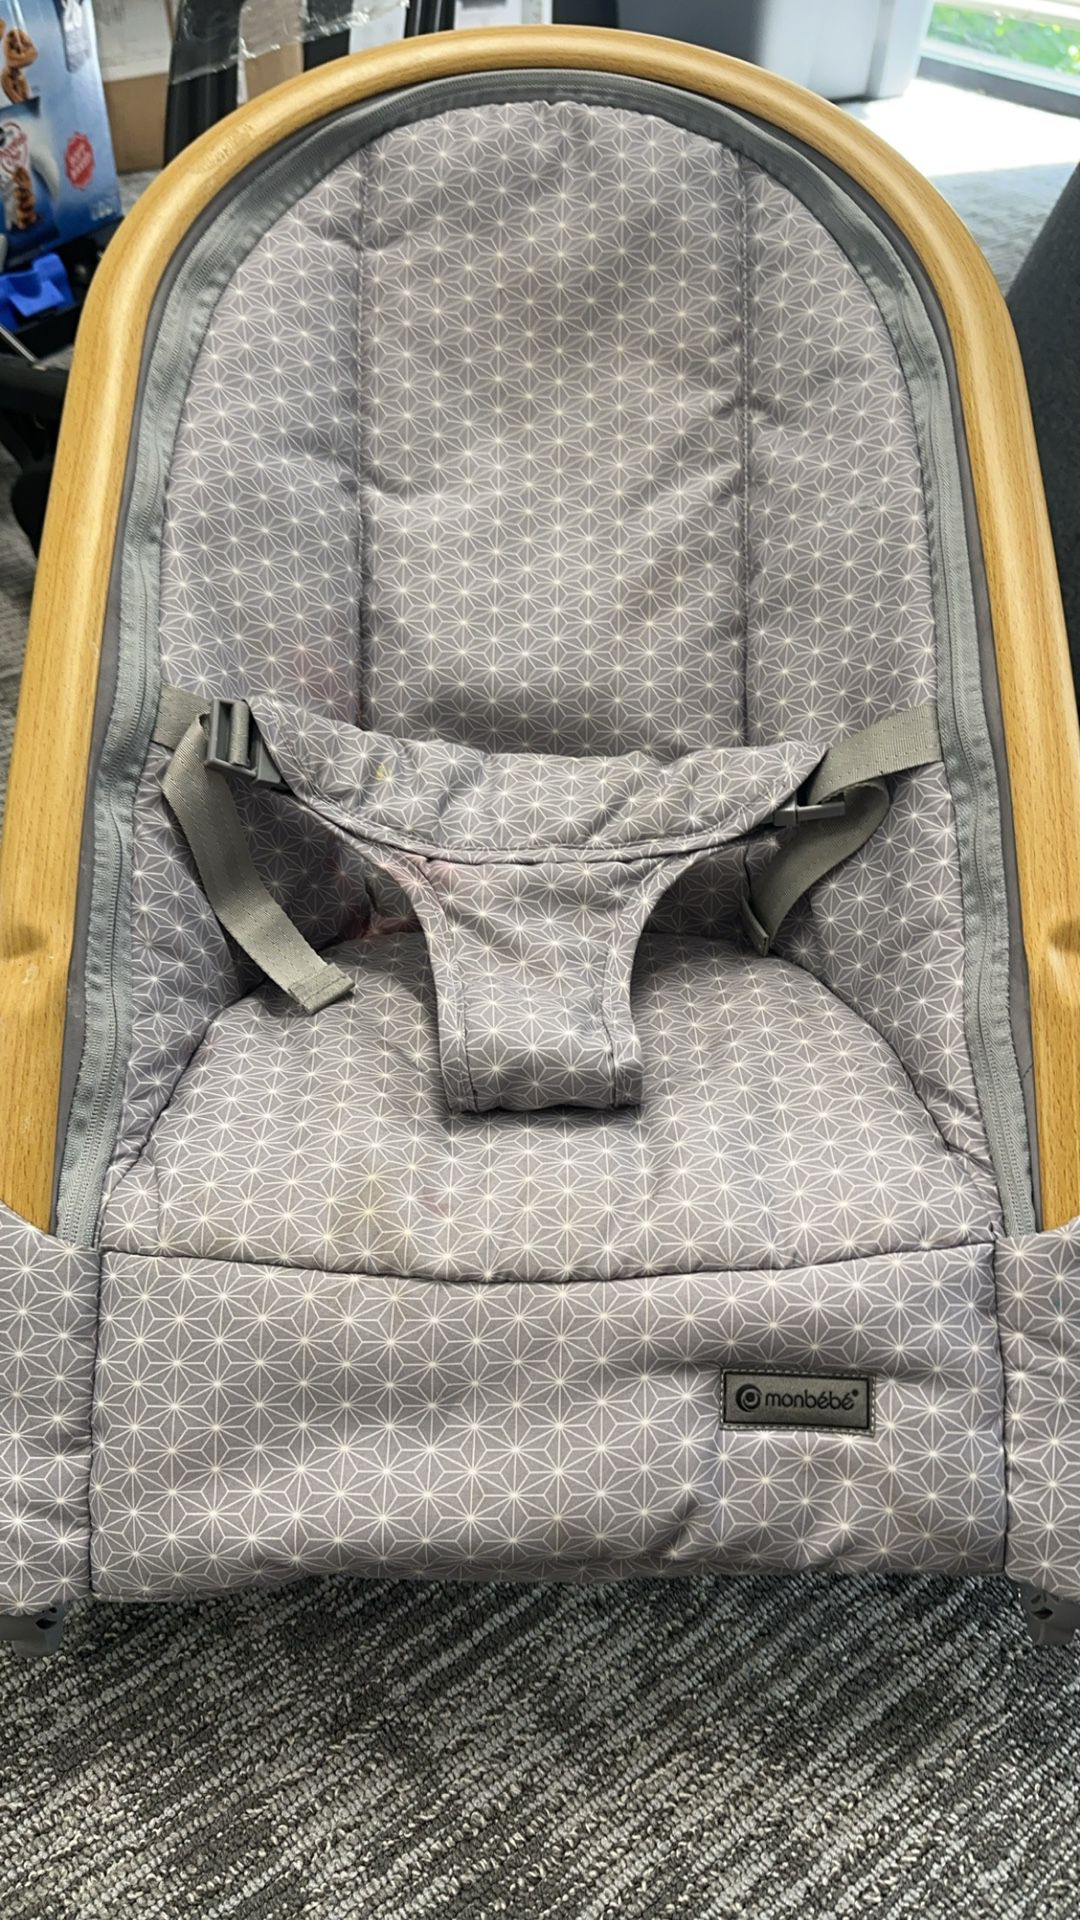 Used Baby “bouncer”